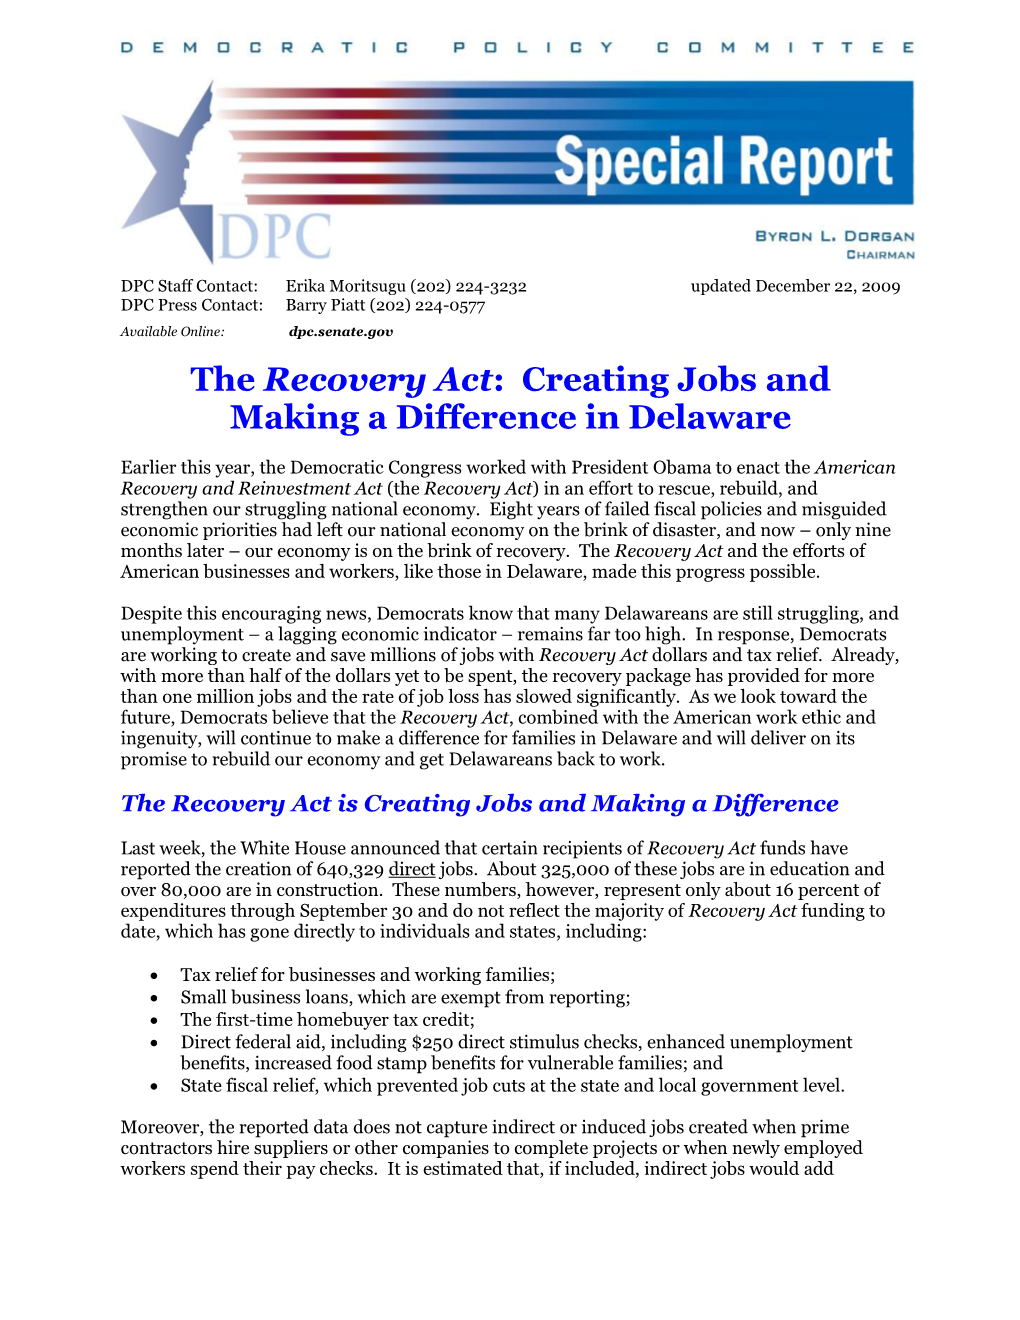 The Recovery Act: Creating Jobs and Making a Difference in Delaware